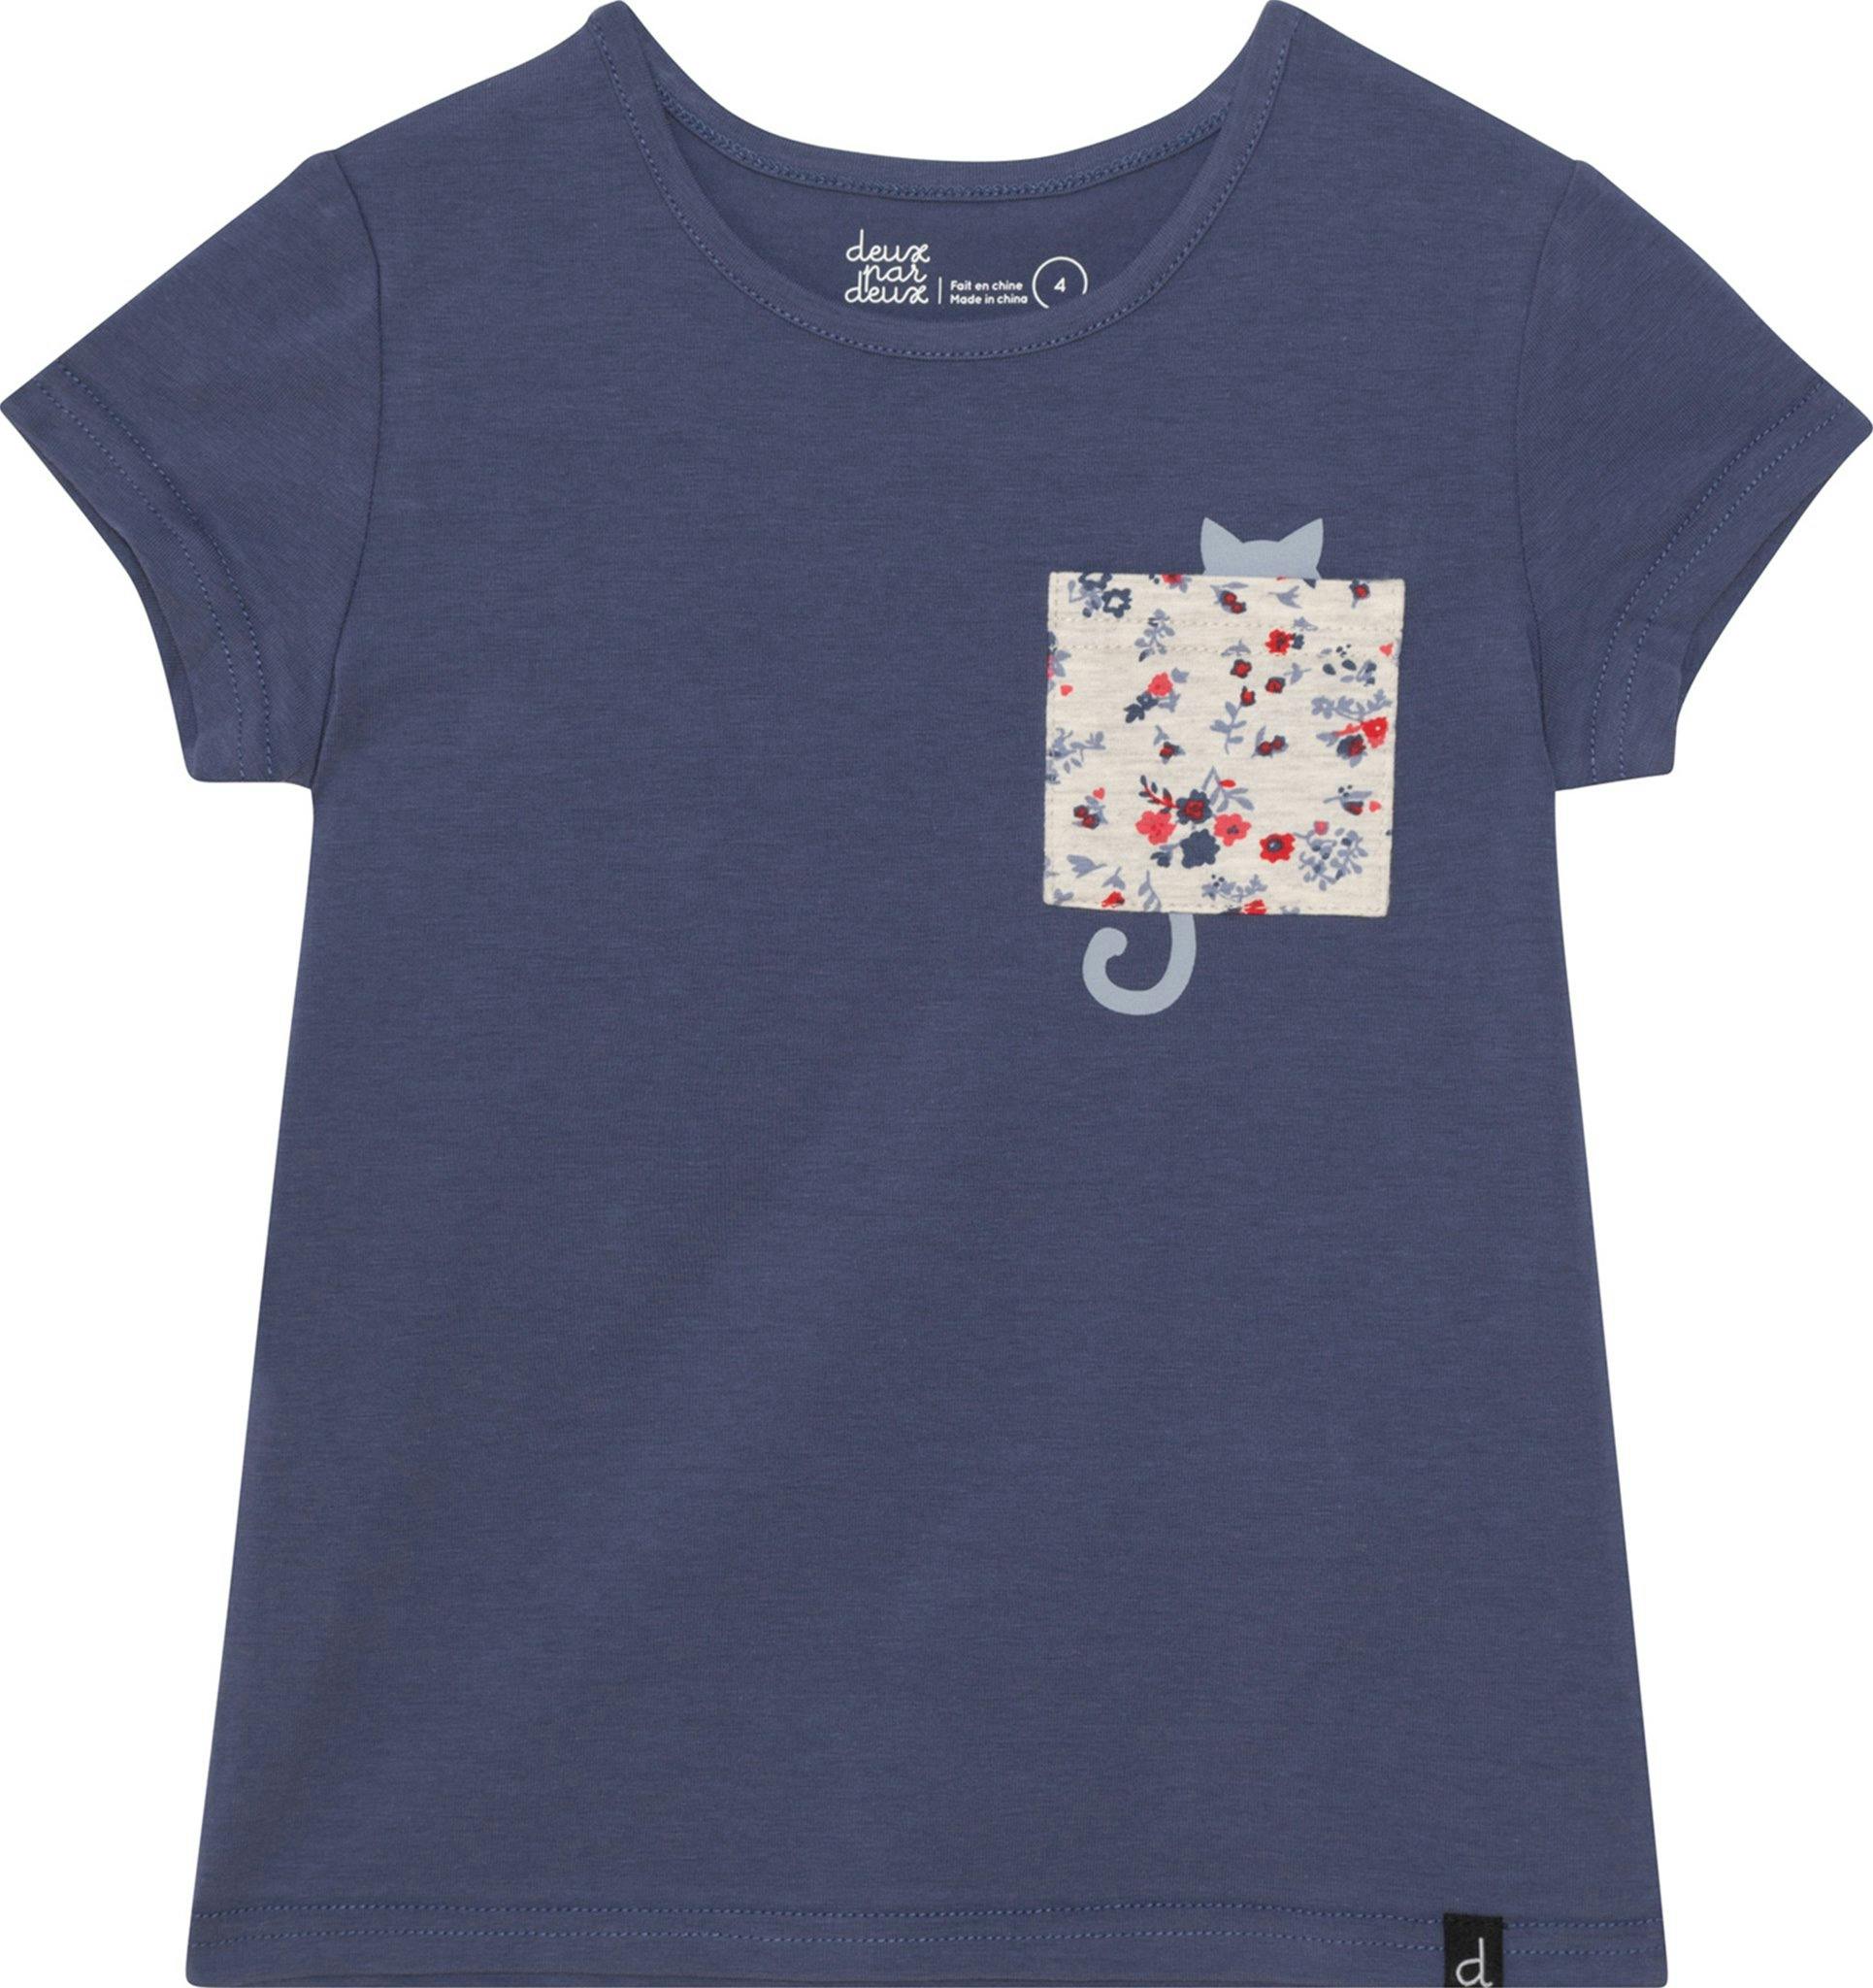 Product image for Organic Cotton Short Sleeve Top - Little Girls